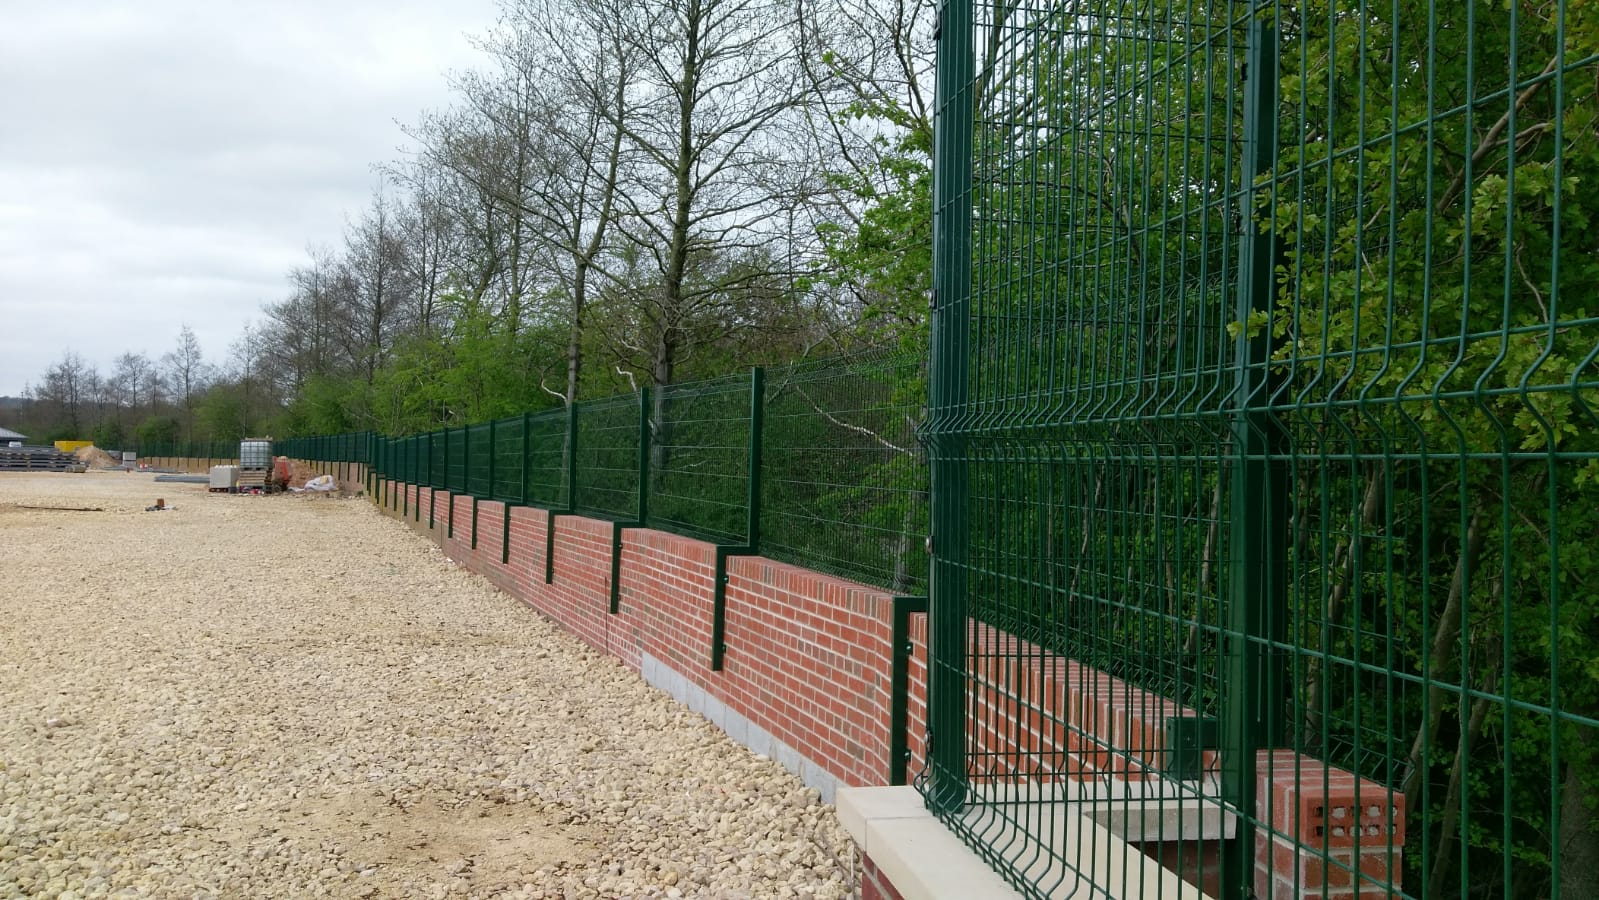 Green V-Mesh Fencing barrier secured atop red brick wall